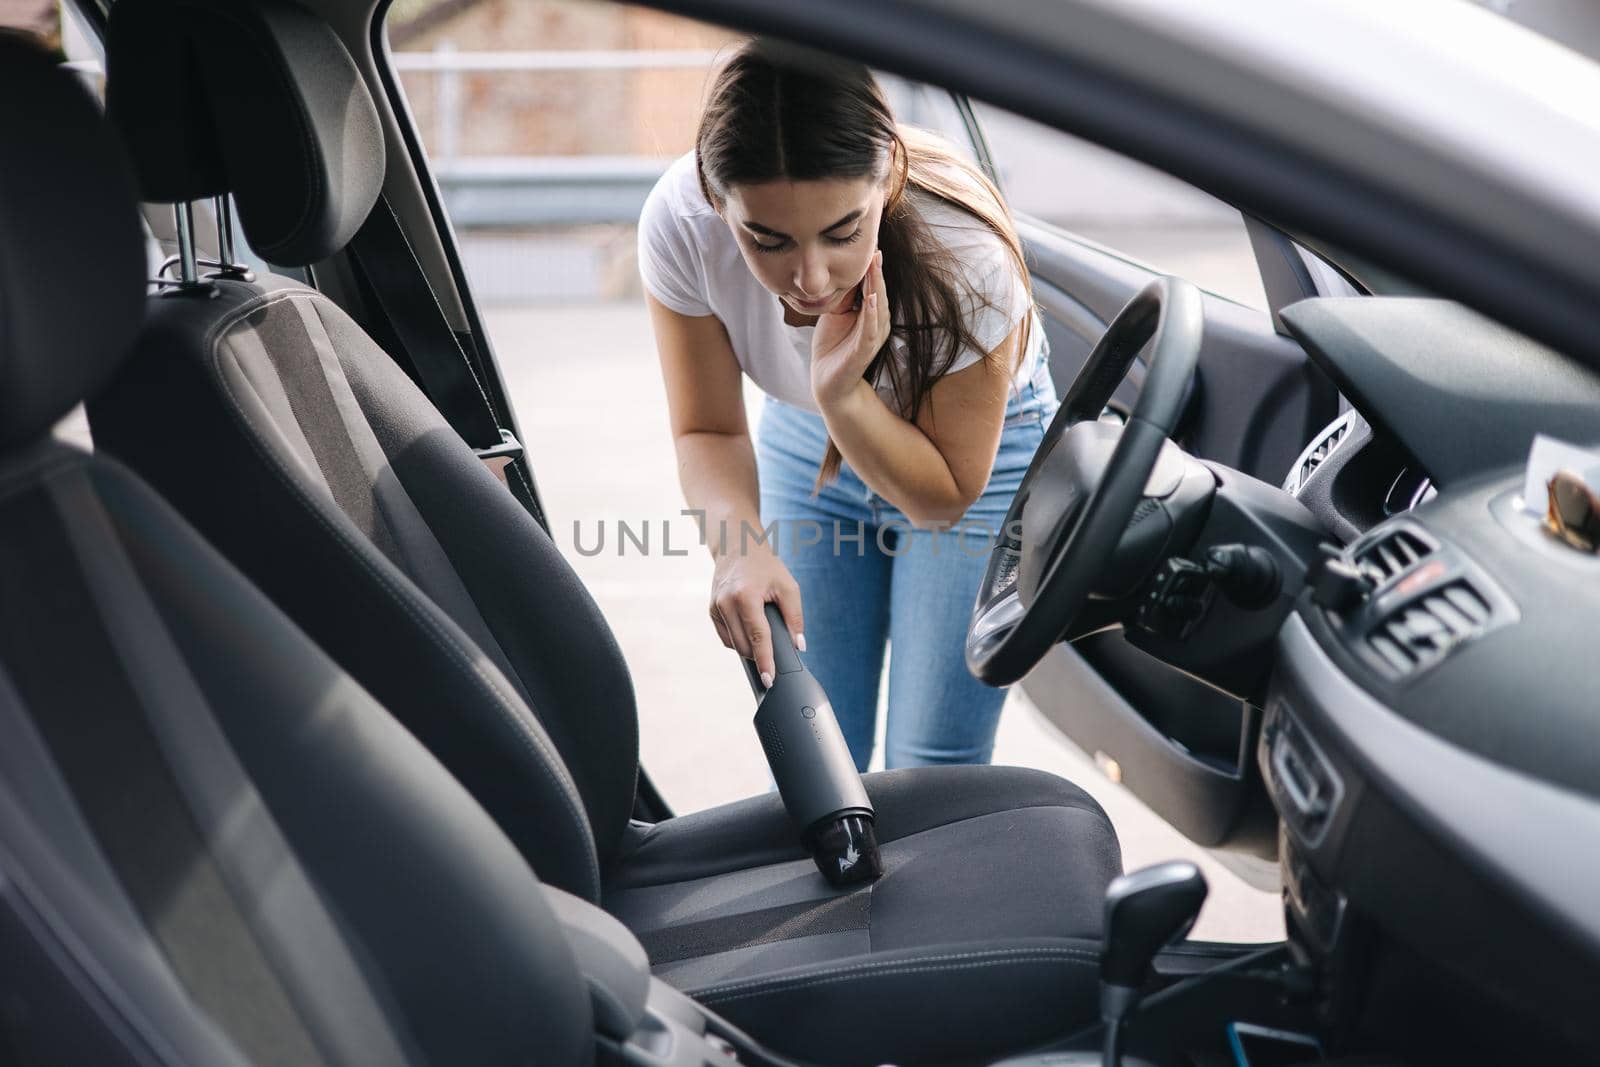 Attractive young woman using portable vacuum cleaner in her car. Woman vacuuming her car in the garage at home. Car interior cleaning.